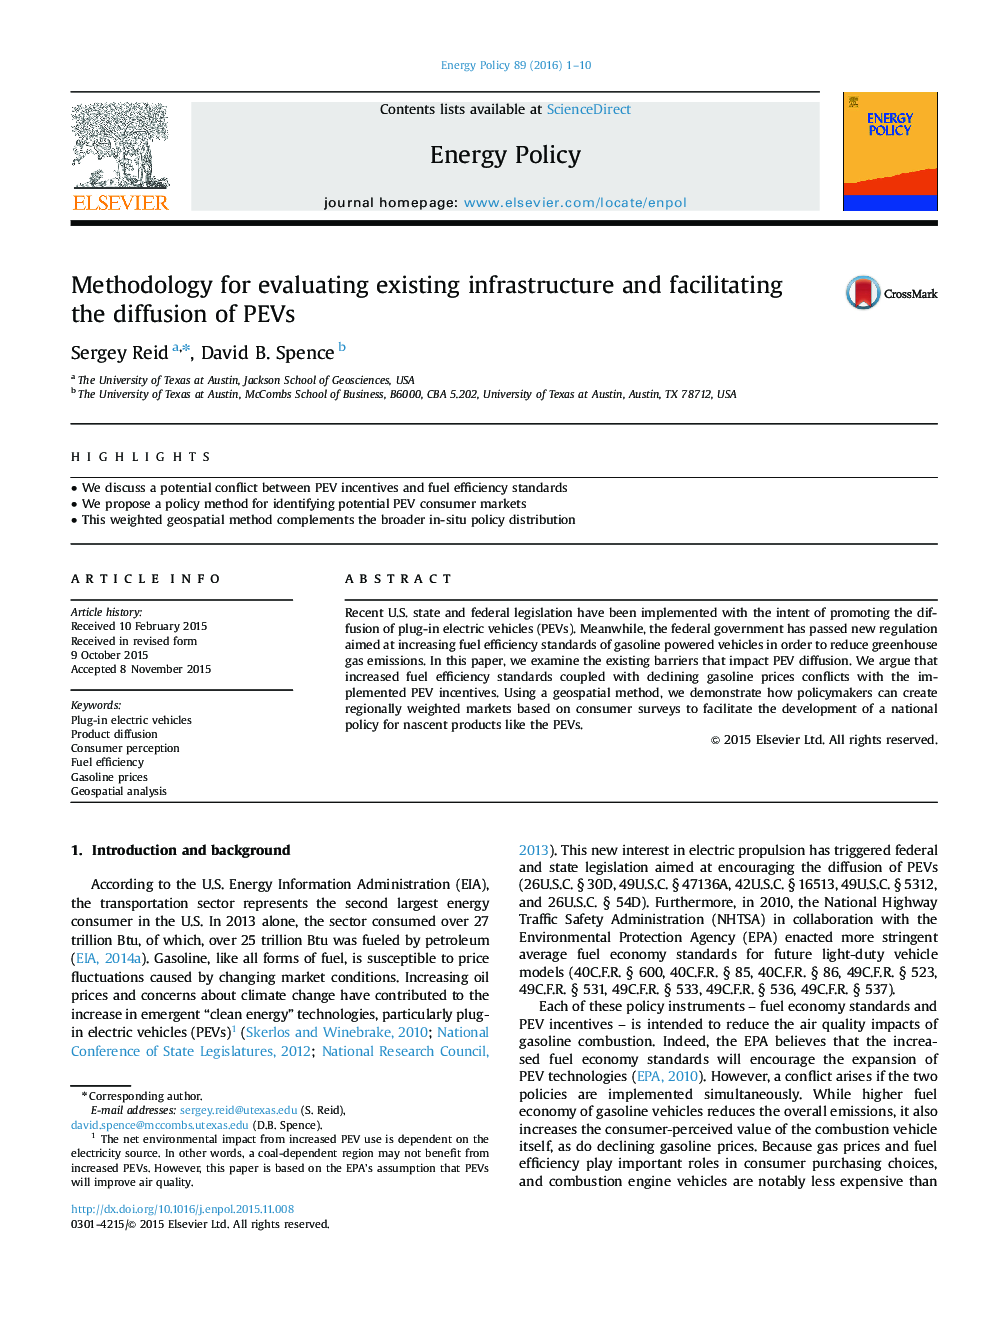 Methodology for evaluating existing infrastructure and facilitating the diffusion of PEVs